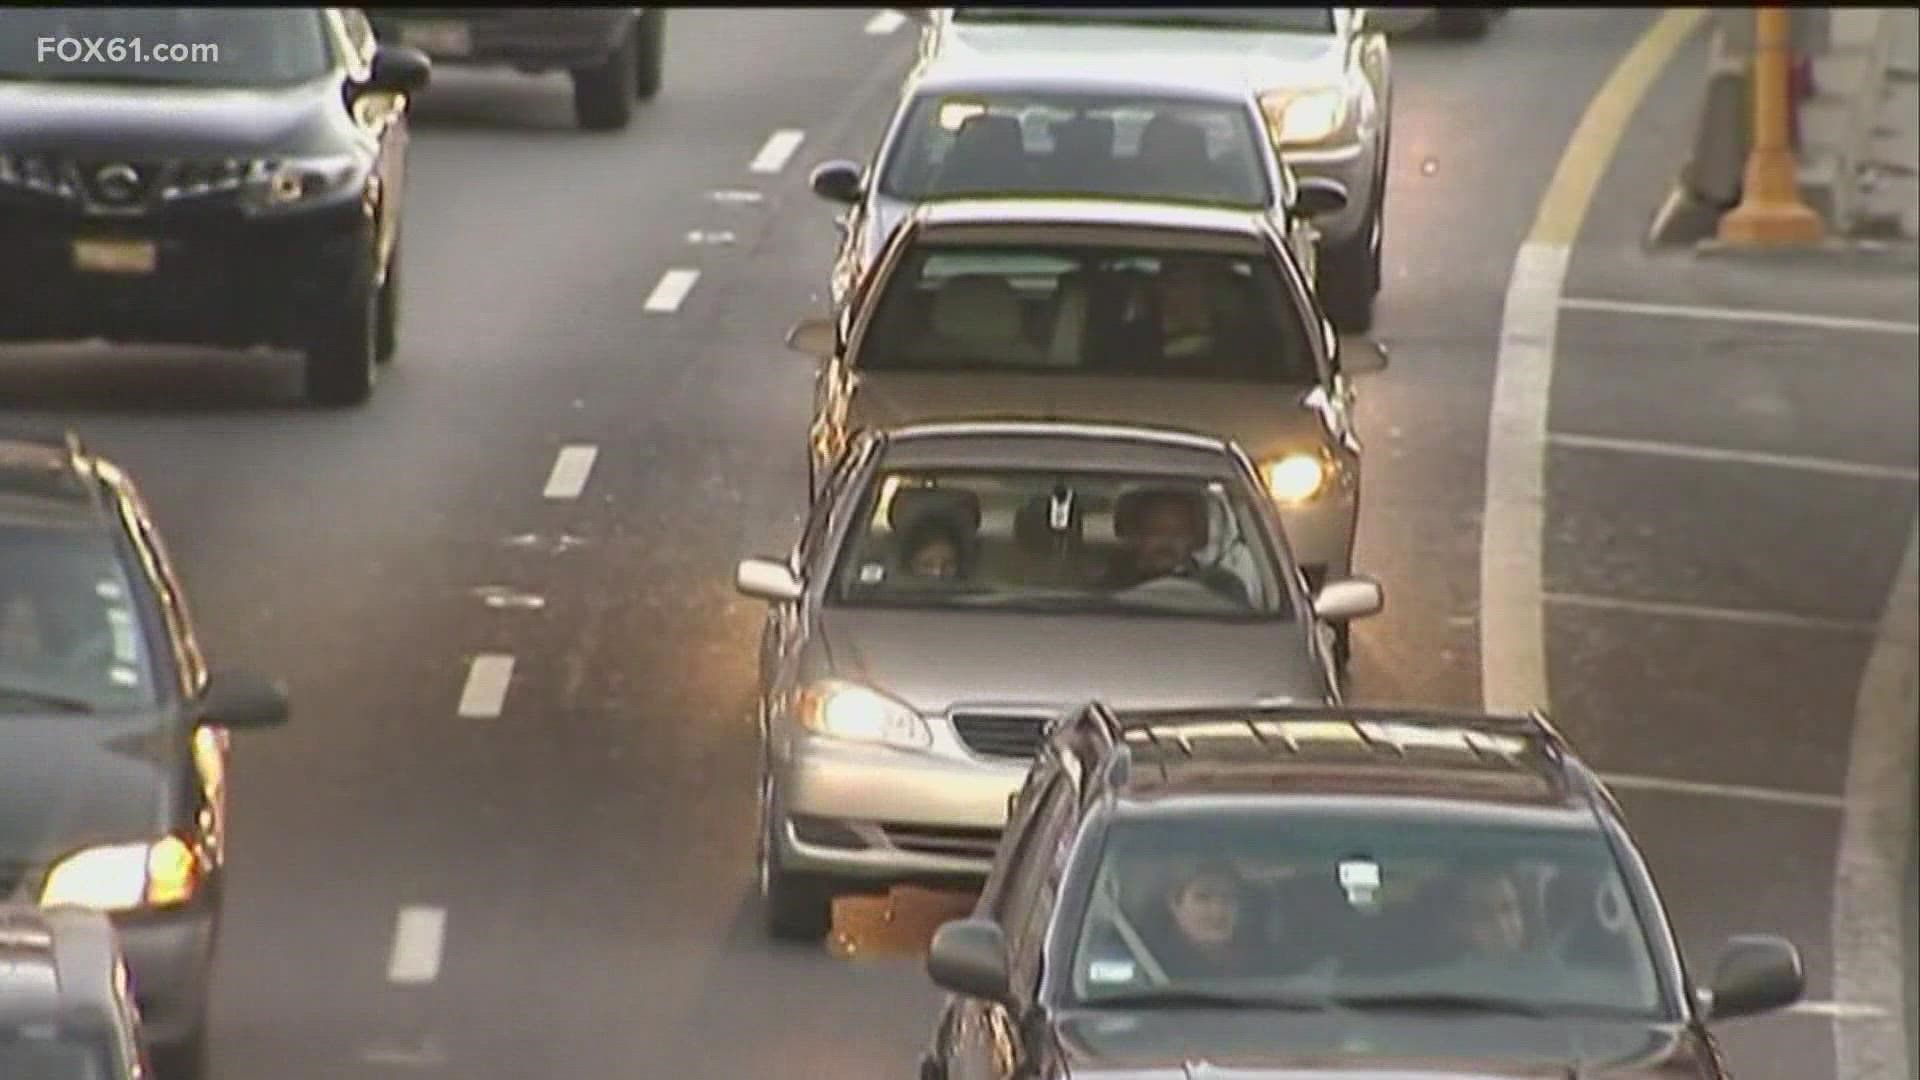 Plenty of people will be hitting the road this Thanksgiving, and while it's safe to travel and gather with loved ones, officials are also encouraging precautions.